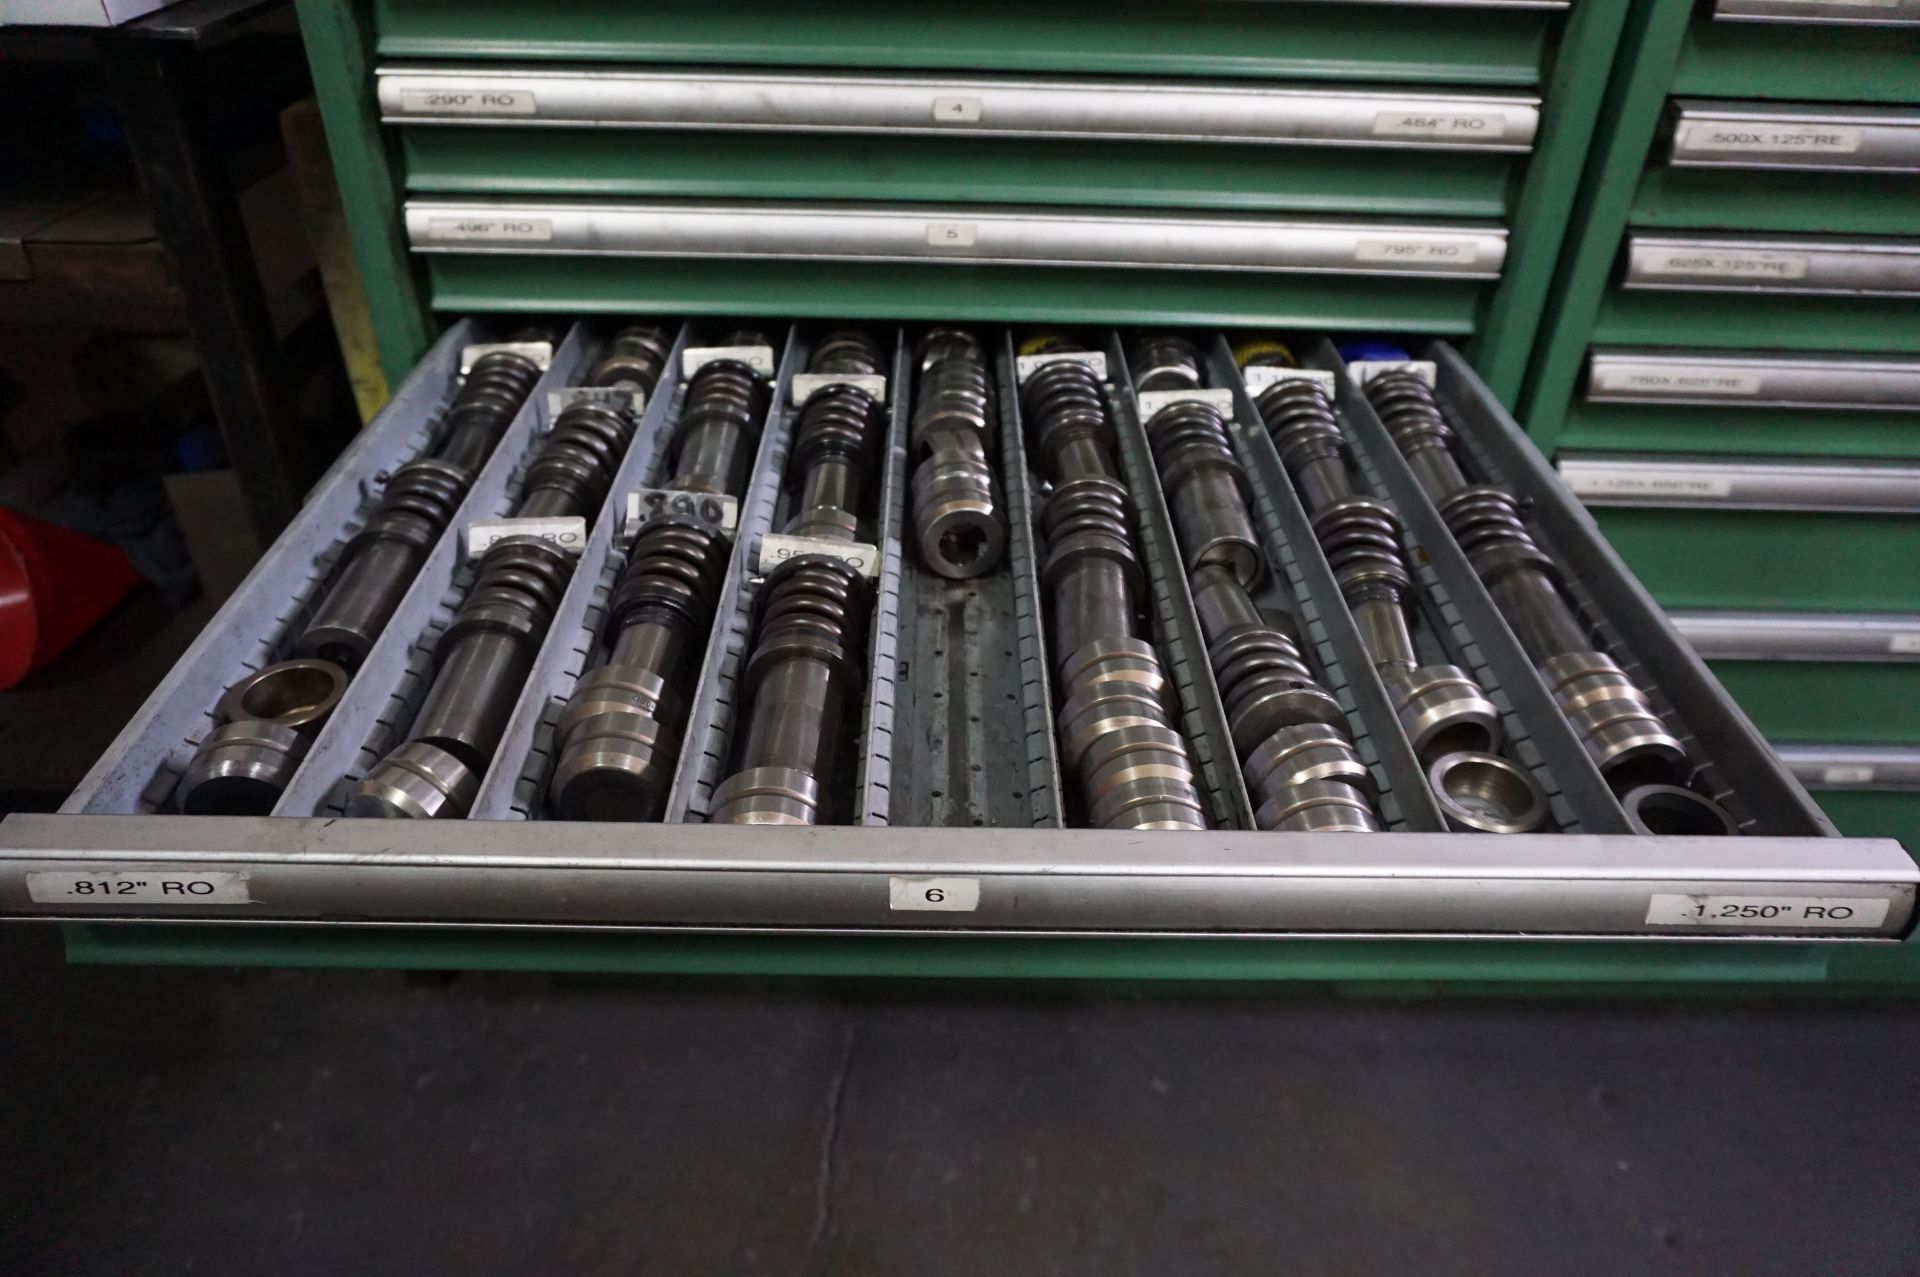 CONTENTS OF 9 DRAWER CABINET TO INCLUDE: .040" ROUND PUNCHES - 1.250" ROUND PUNCH TOOLING 1 1/4" - Image 6 of 9